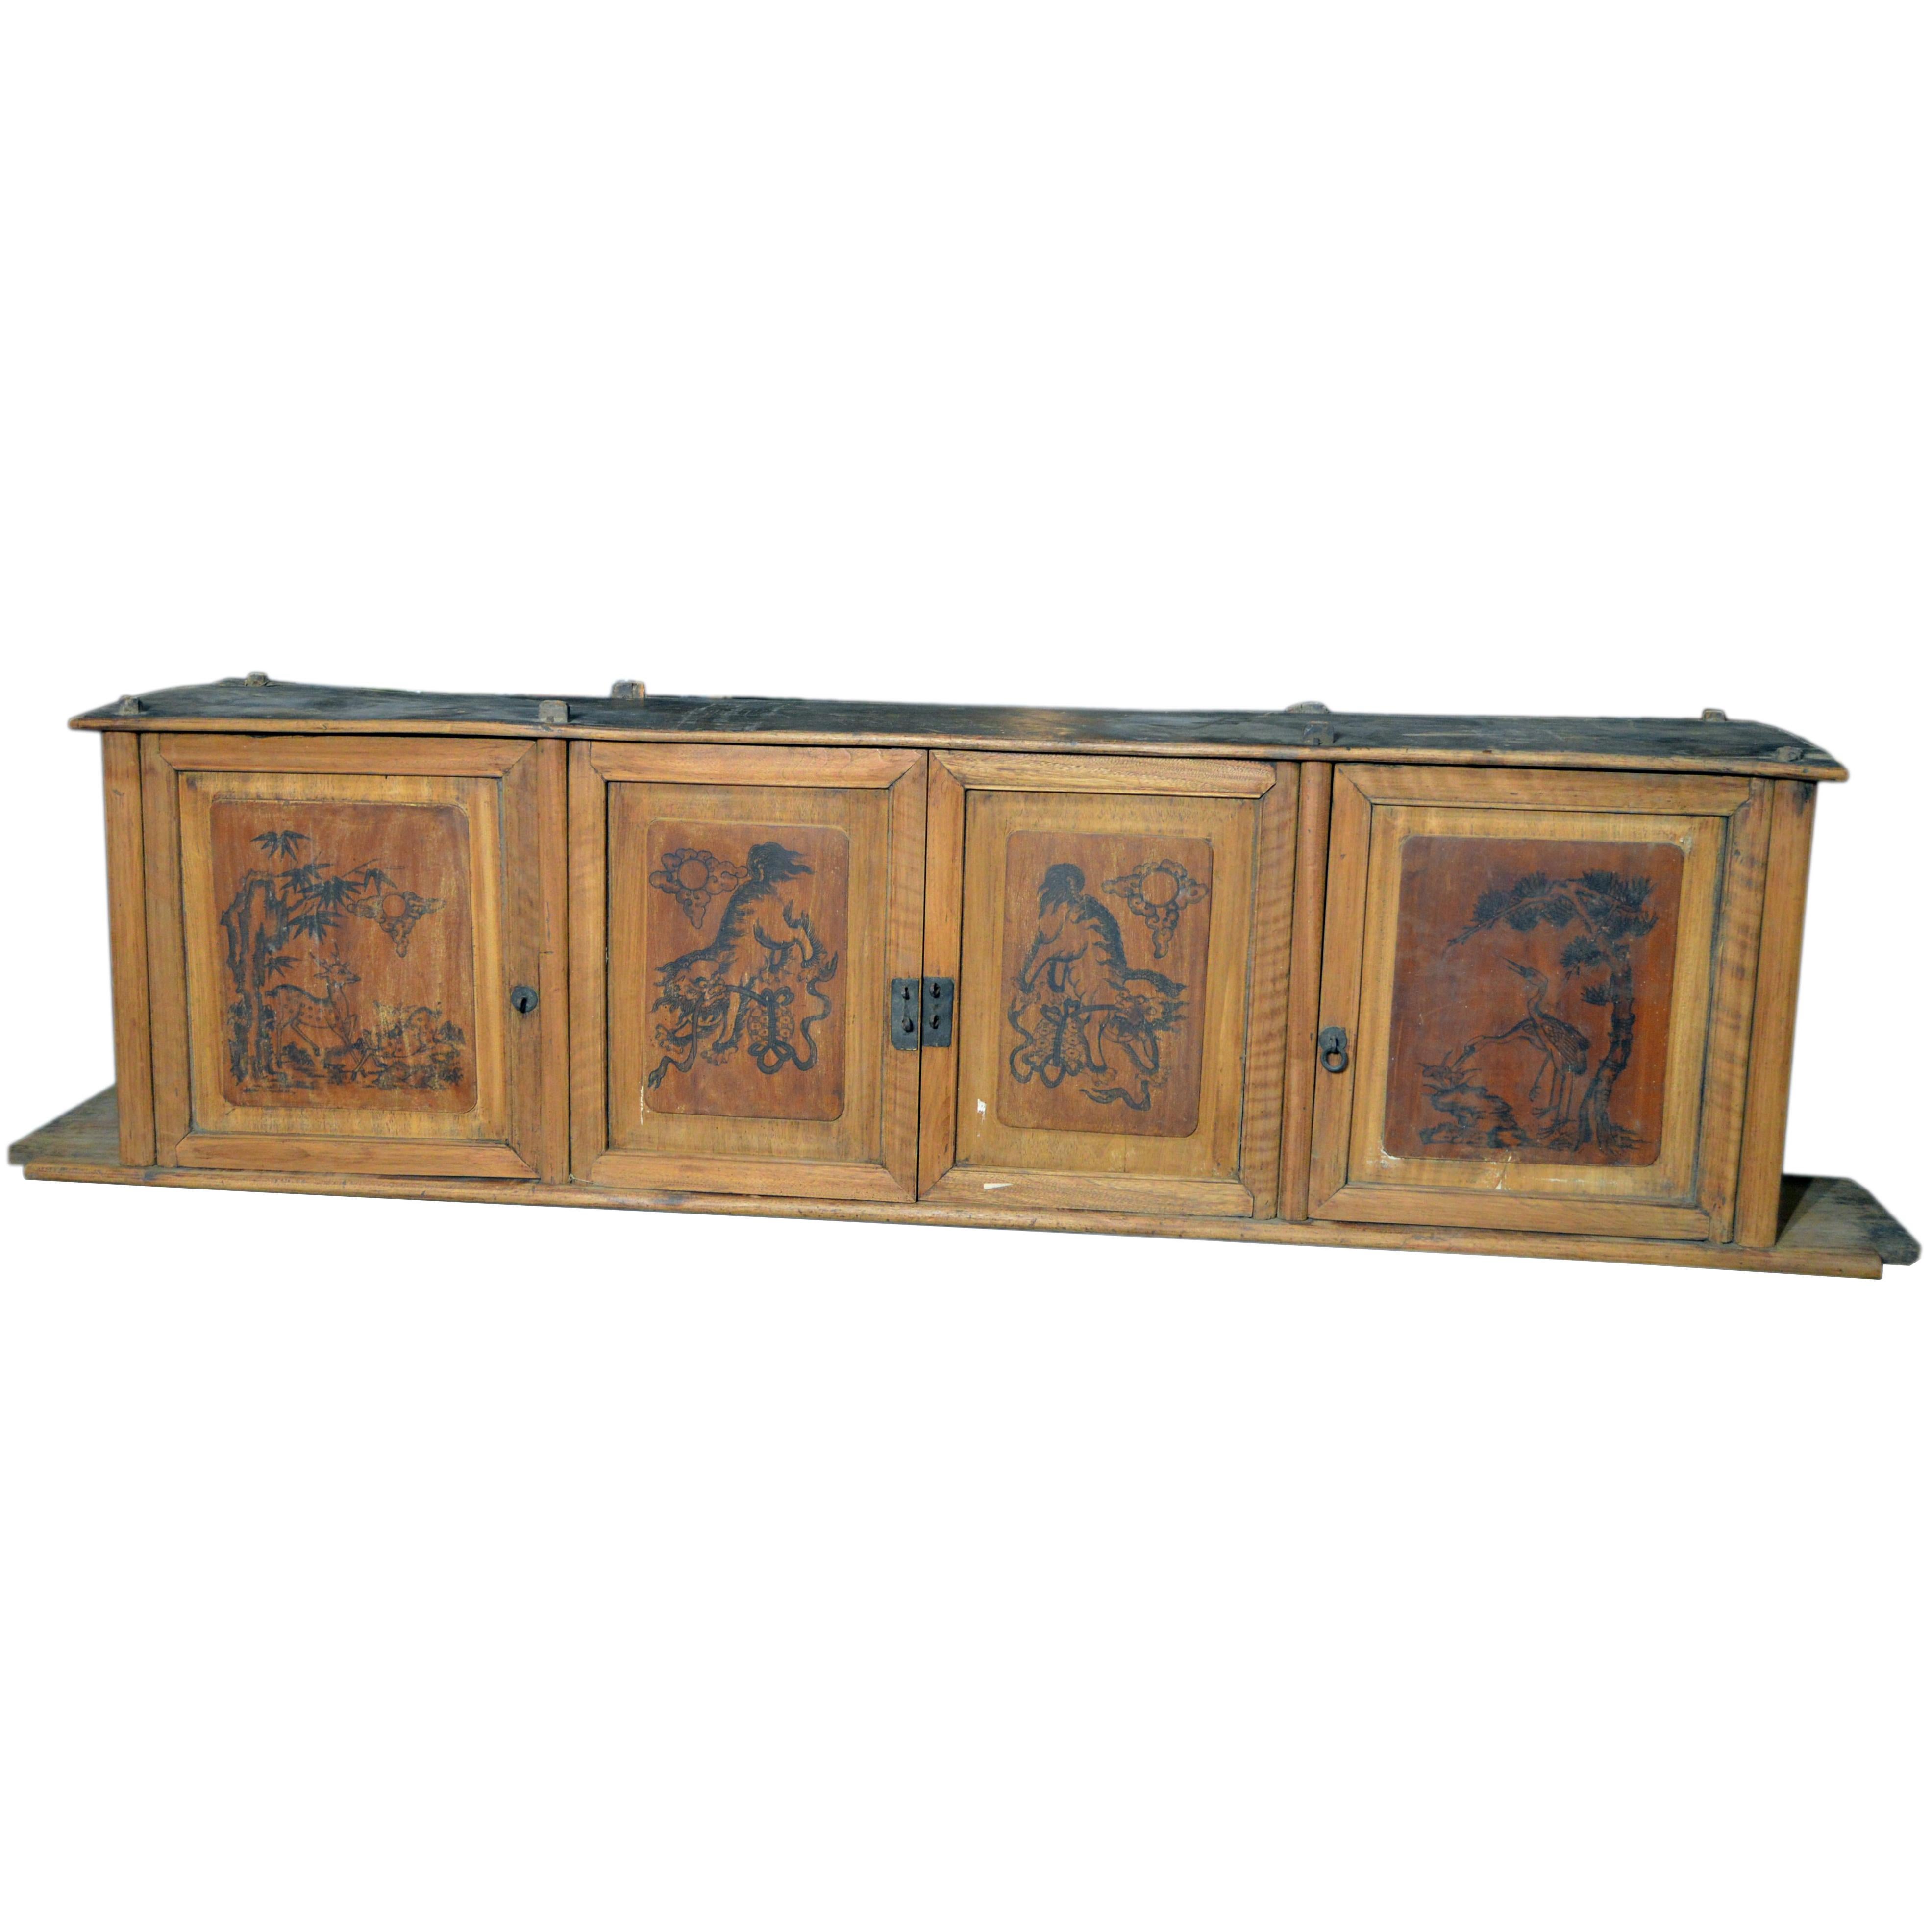 19th Century Chinese Four-Door Low Wooden Cabinet with Hand-Painted Scenes